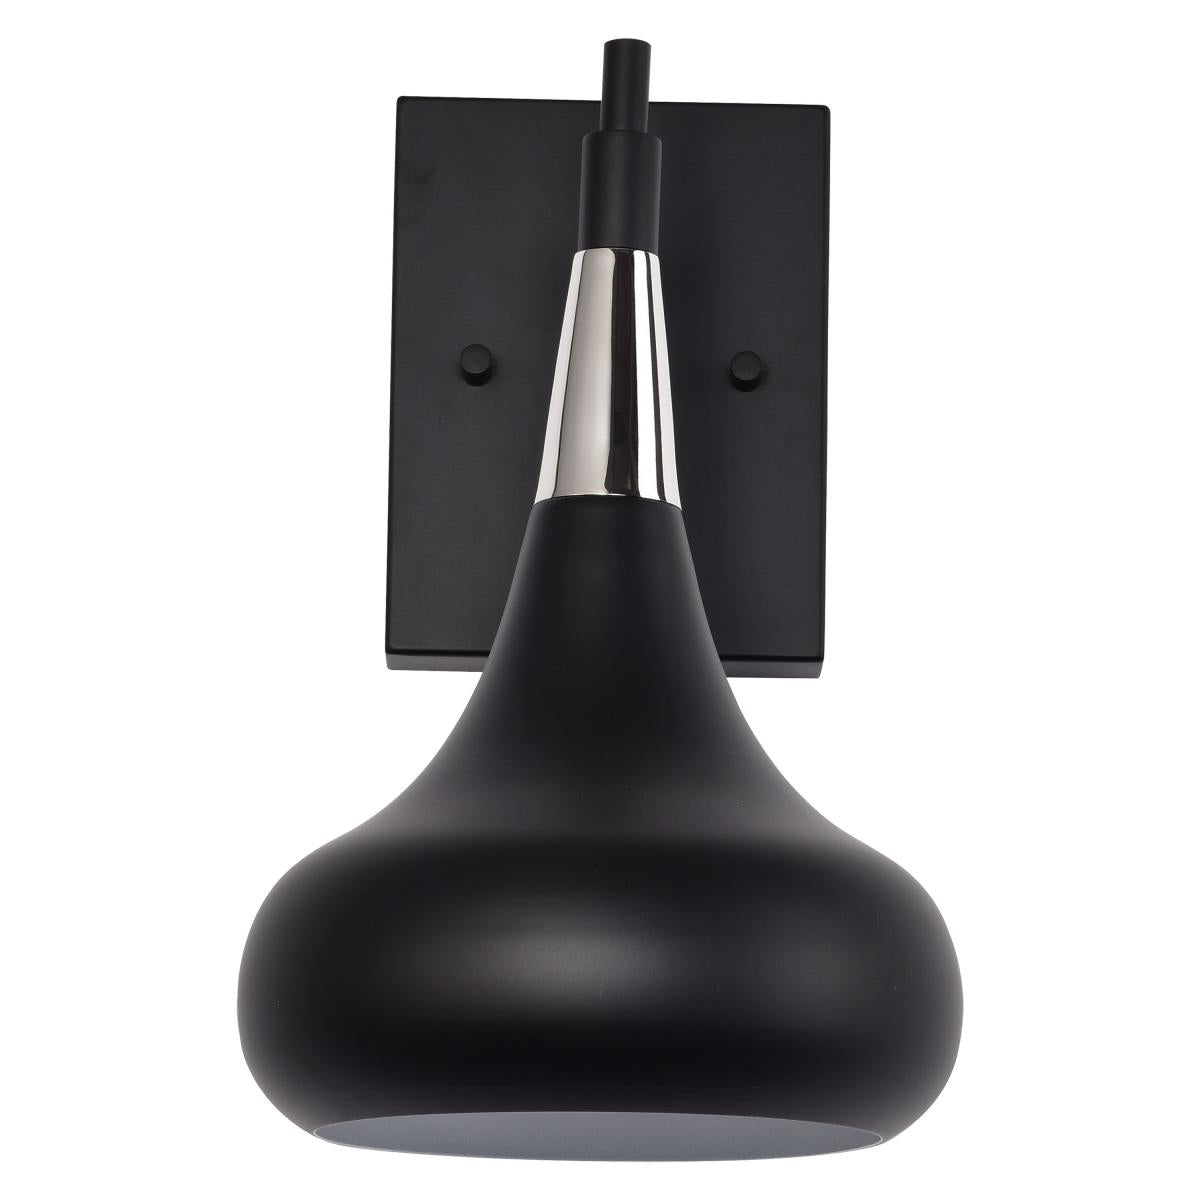 Phoenix - 1 Light Wall Sconce with Matte Black - Polished Nickel Finish